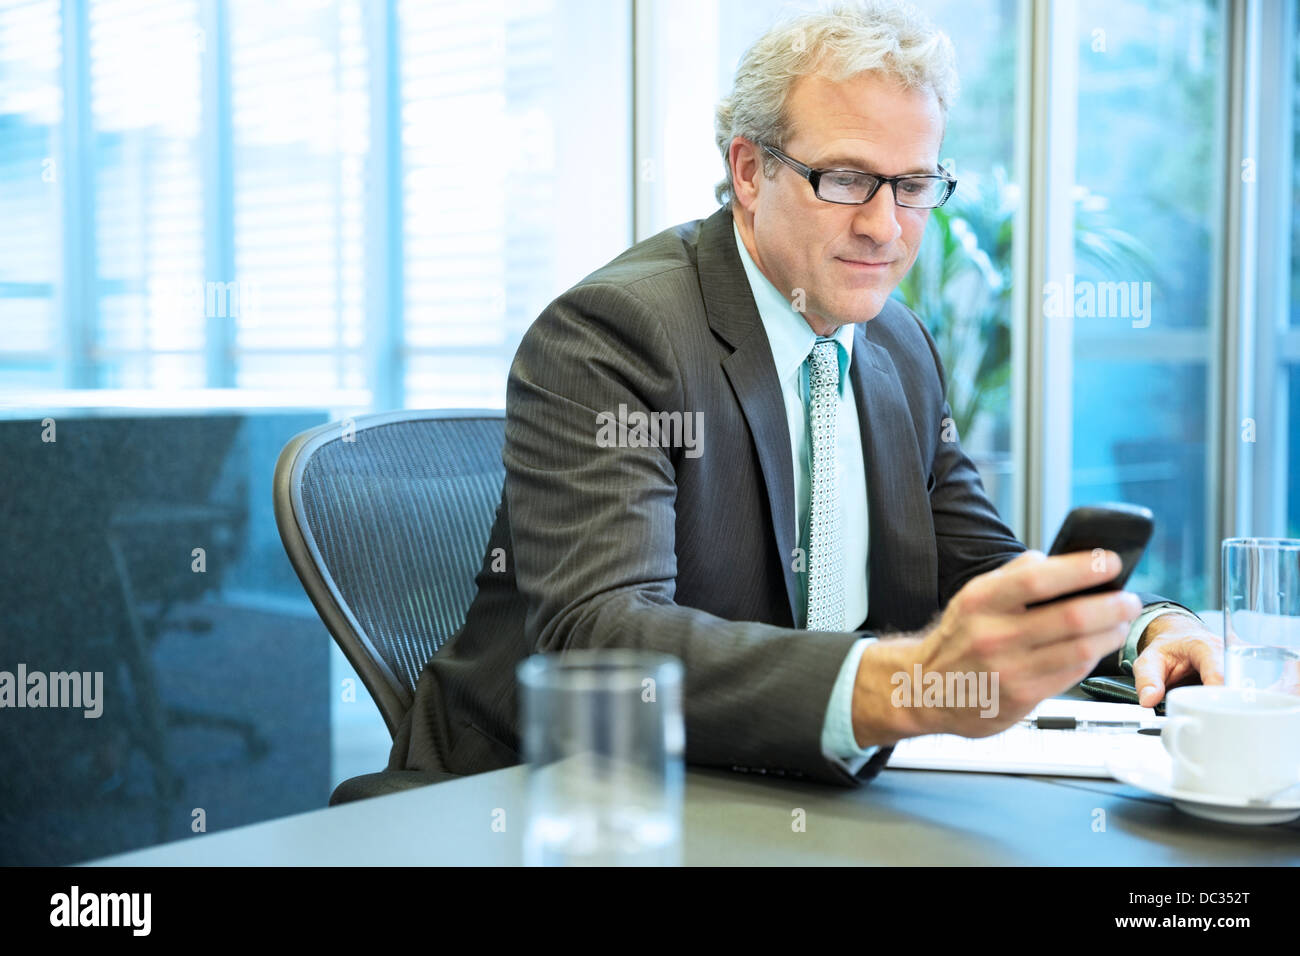 Businessman text messaging with cell phone in conference room Banque D'Images